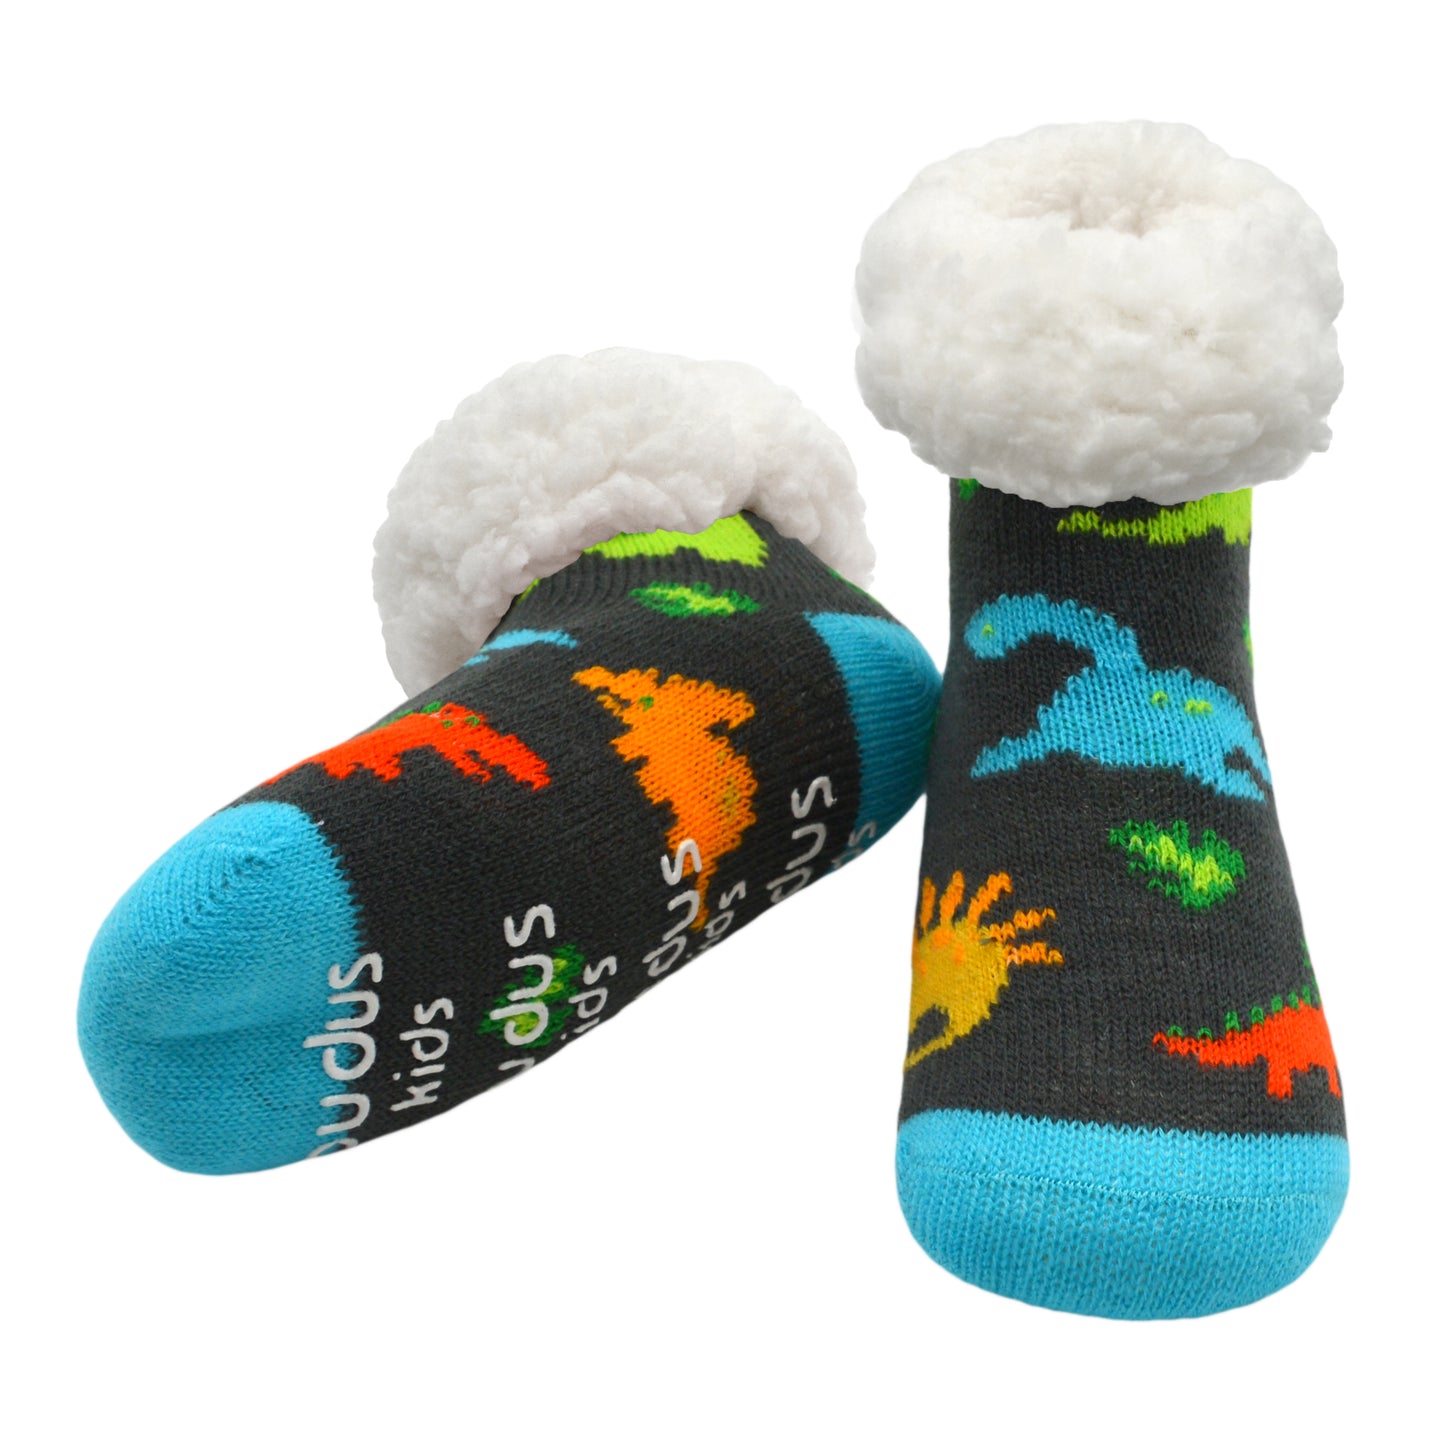 Pudus Cozy Winter Slipper Socks for Kids in Dinosaur Multi with Non-Slip Grippers and Faux Fur Sherpa Fleece - Boy and Girl Fuzzy Socks (Ages 4-7)